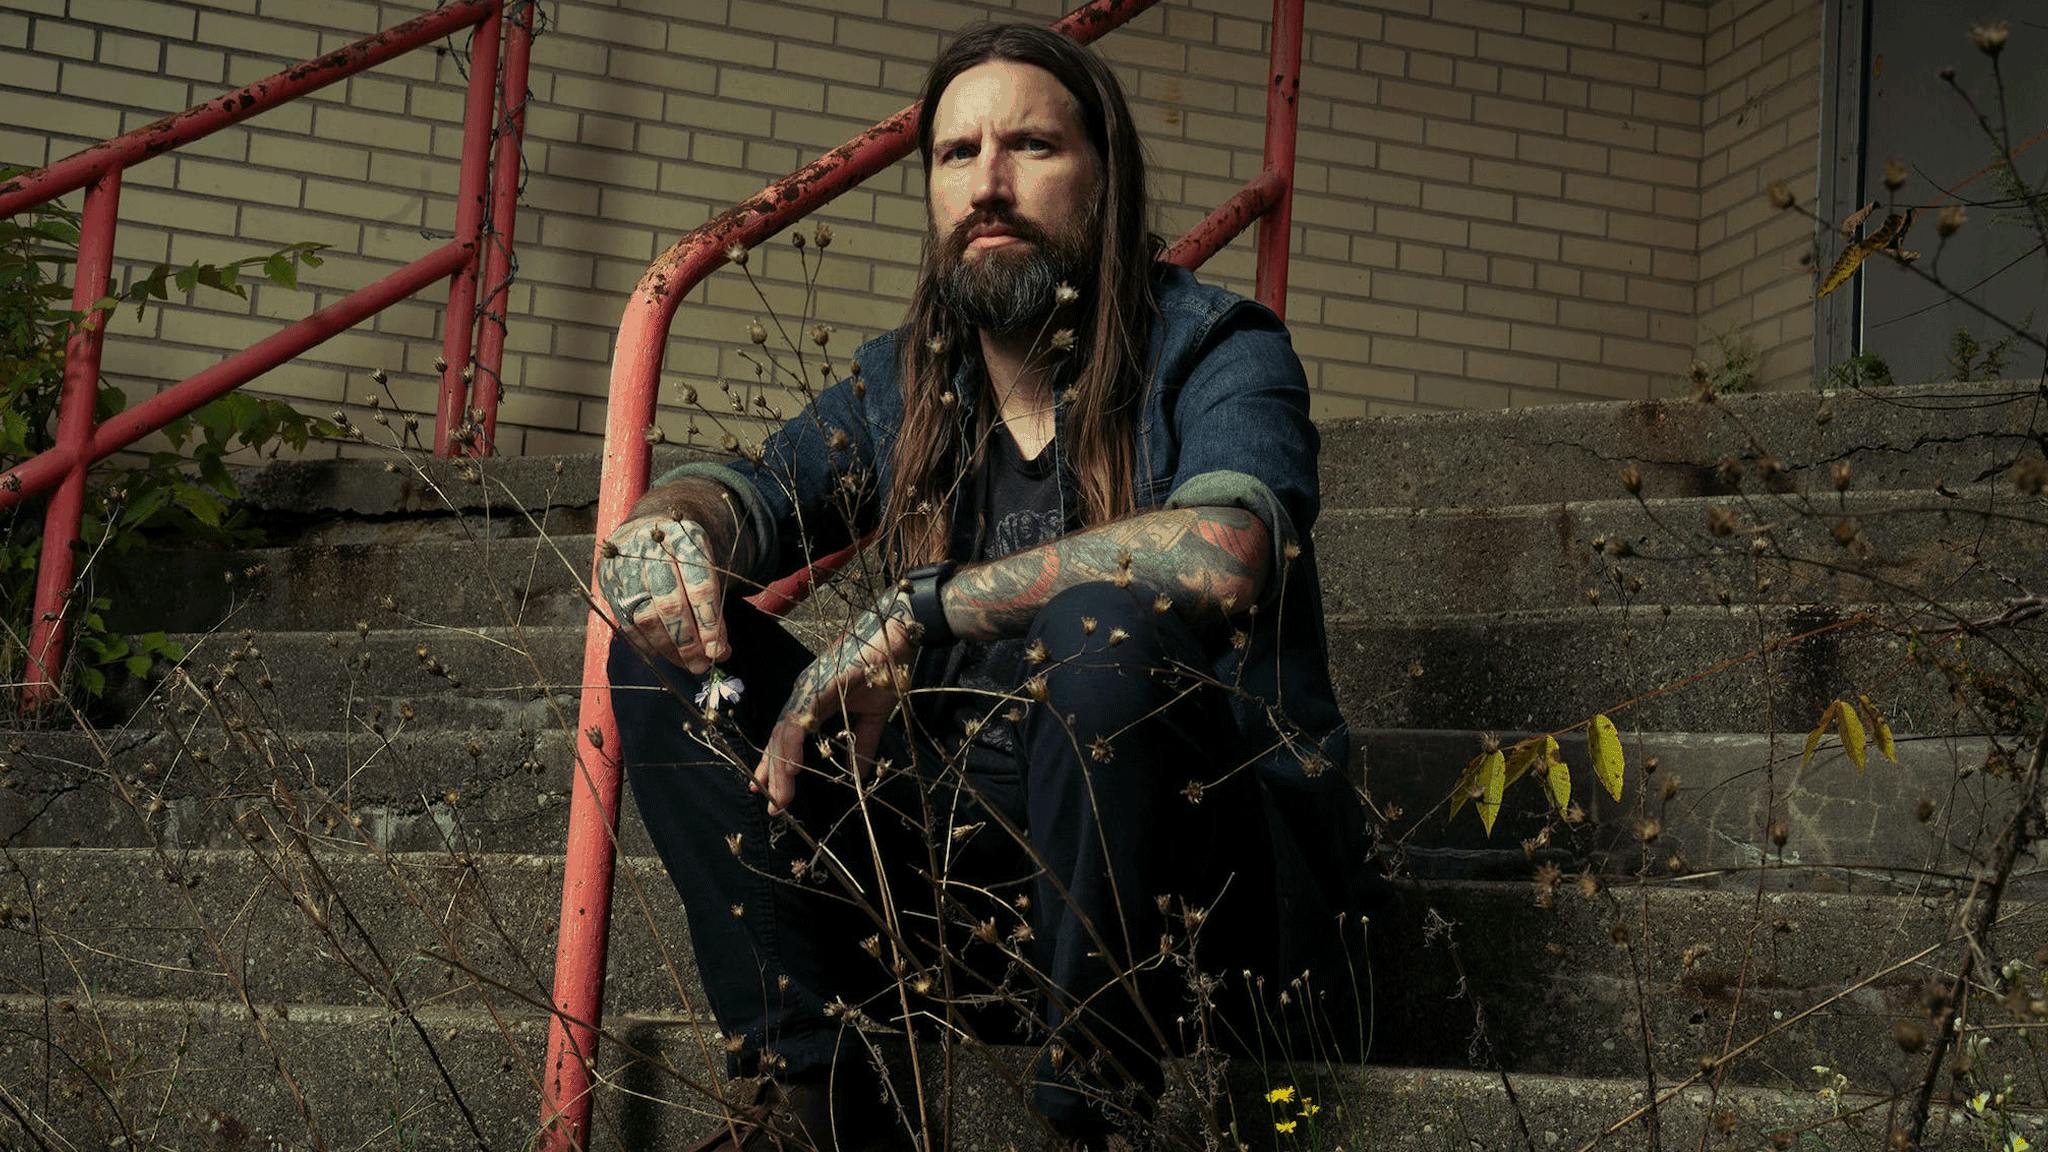 Former Every Time I Die frontman Keith Buckley has a heavy new band